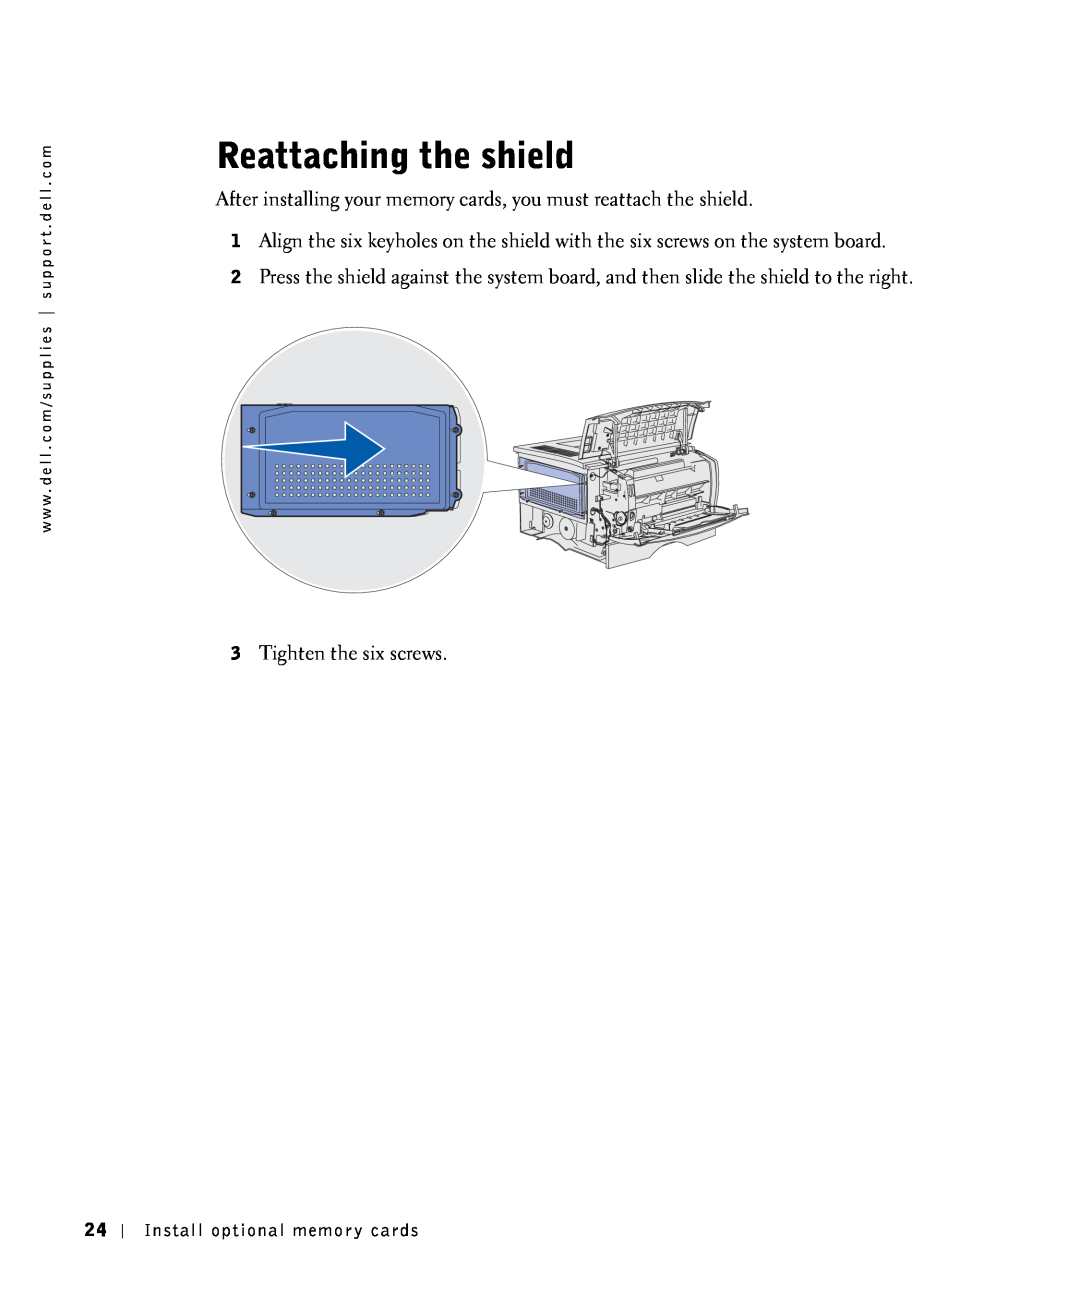 Dell S2500 owner manual Reattaching the shield, After installing your memory cards, you must reattach the shield 